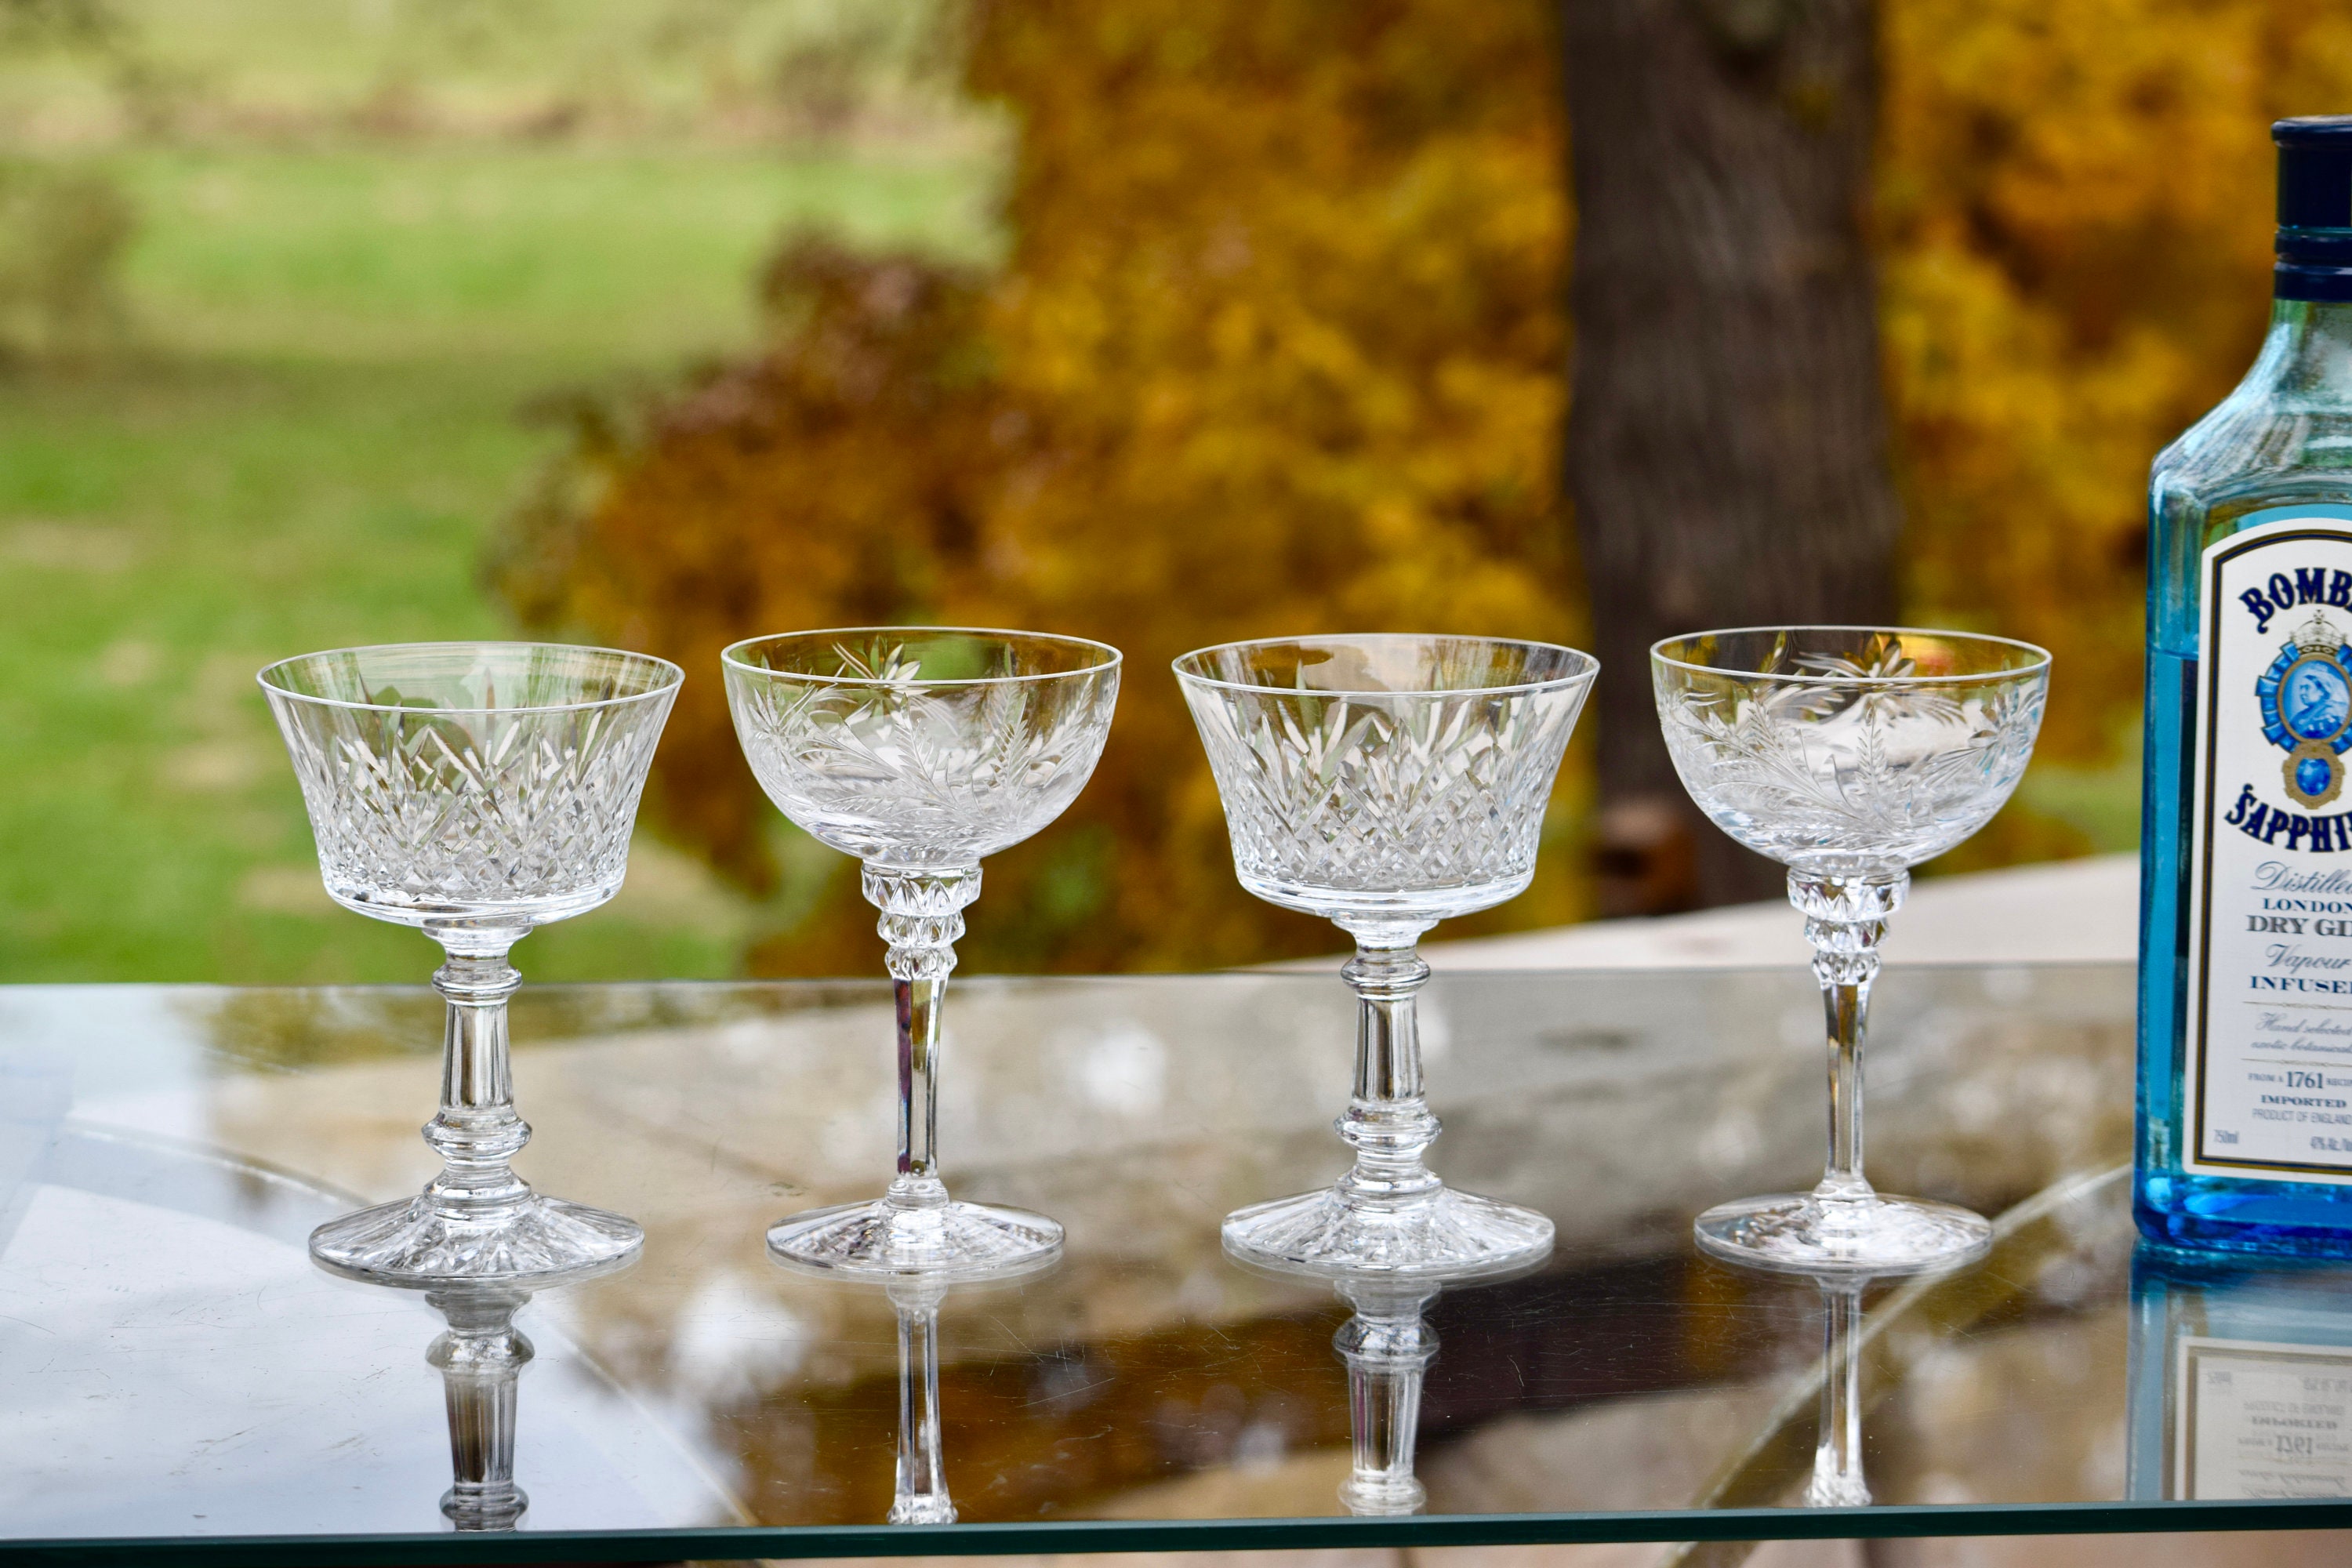 5 Vintage Etched Cocktail ~ Martini Glasses, Tiffin Franciscan, Sonja,  1940's,Nick and Nora, Mixologist Craft Cocktails ~ Champagne Glass